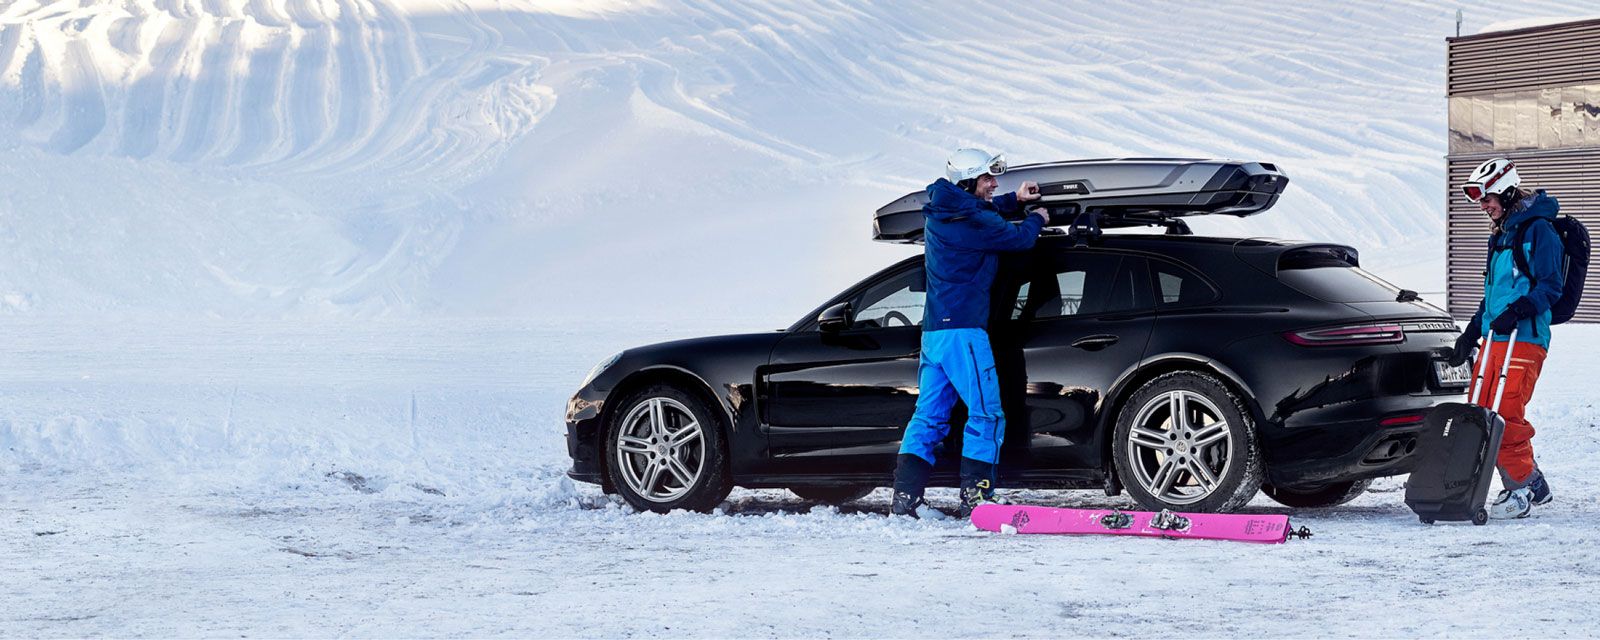 In the snow, one skier opens the Thule roof box while the other rolls a Thule wheeled duffel bag.